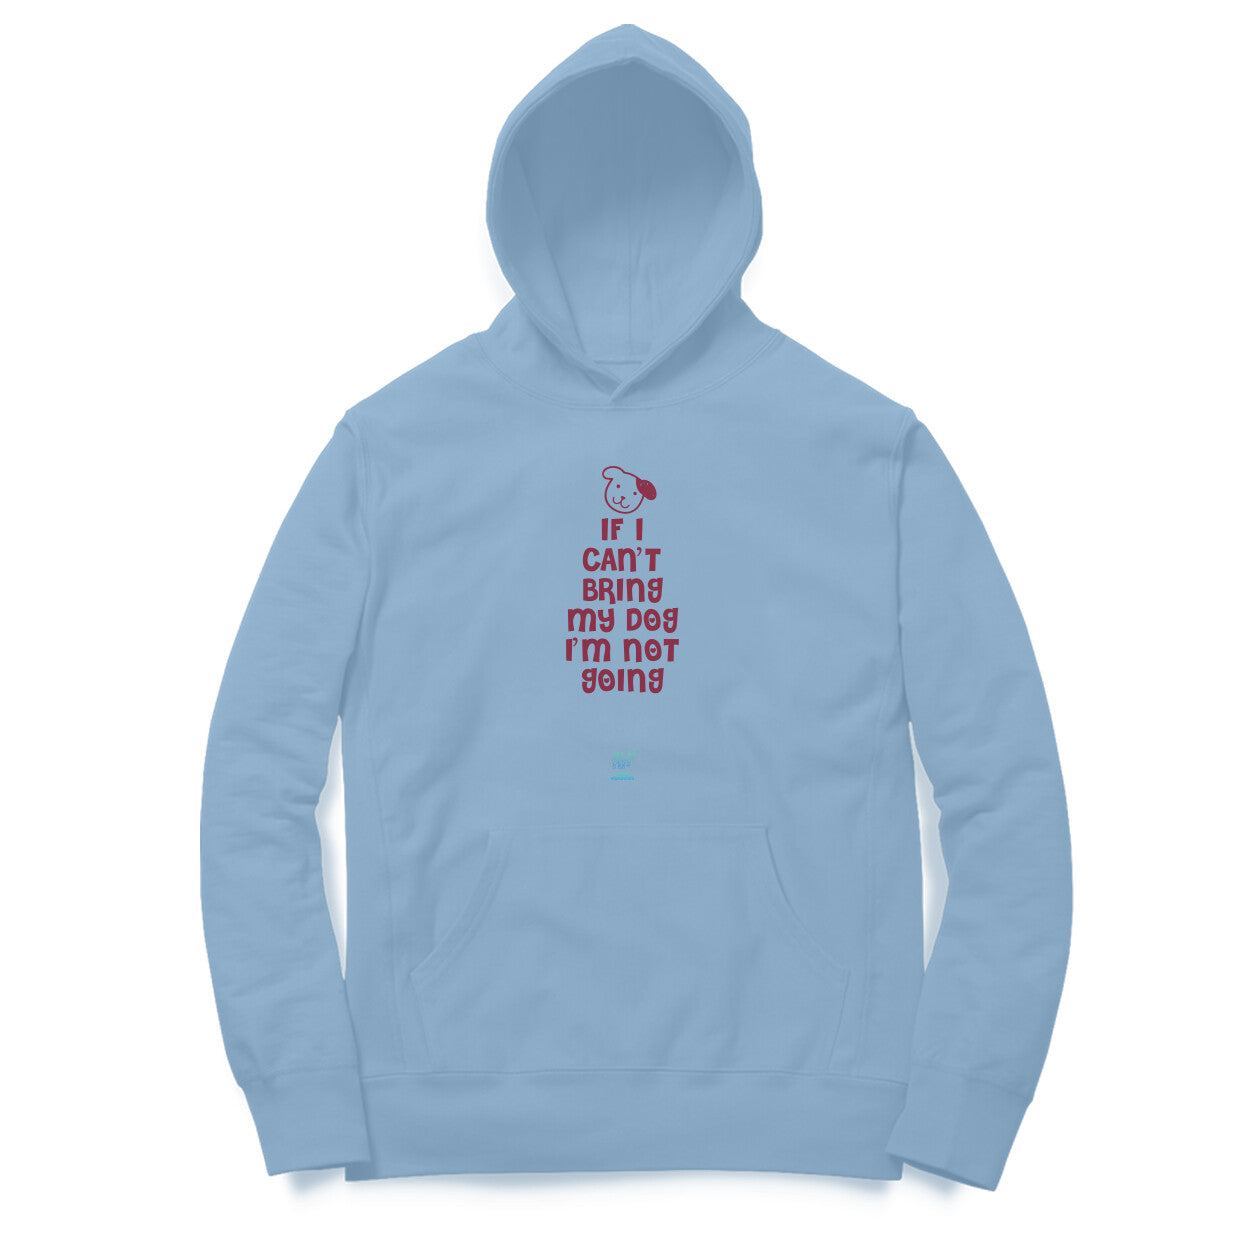 DOG - If I can't bring my dog, I'm not going - Unisex Hoodie